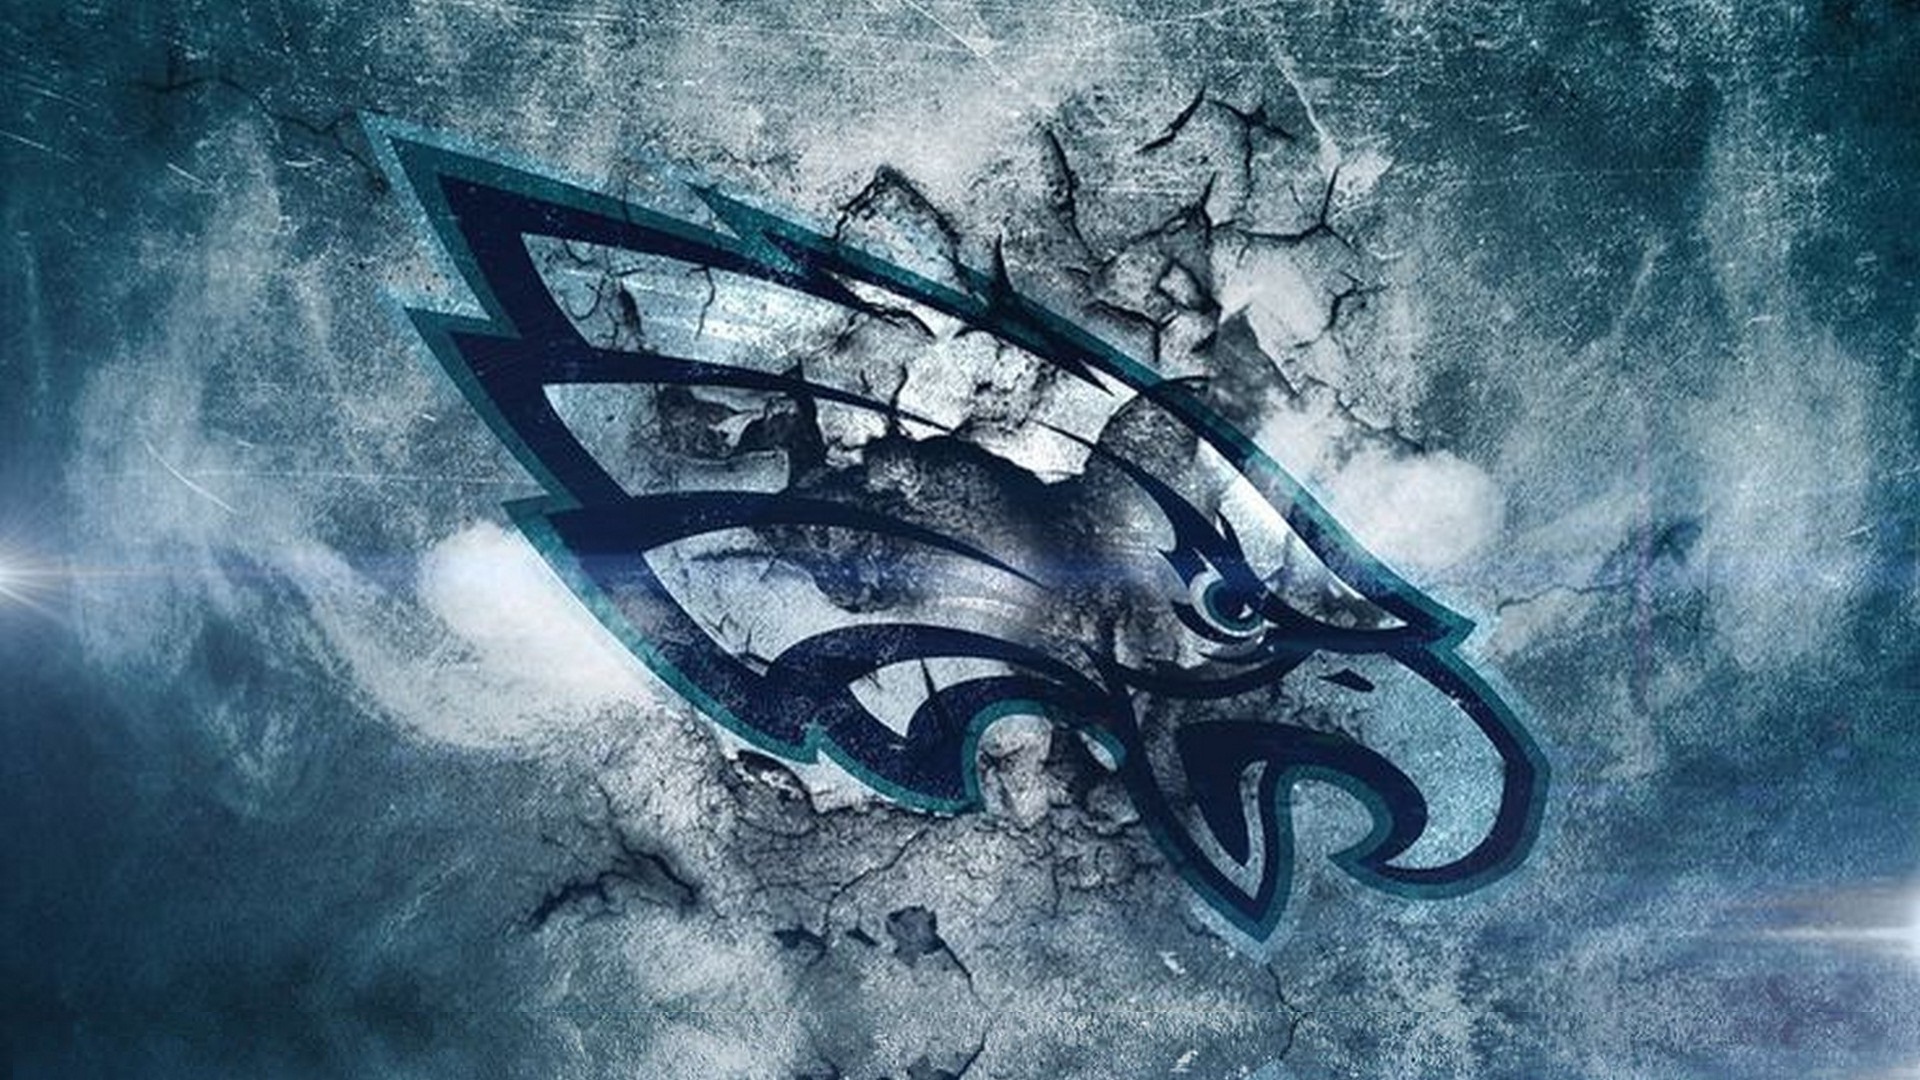 Wallpapers HD NFL Eagles with resolution 1920x1080 pixel. You can make this wallpaper for your Mac or Windows Desktop Background, iPhone, Android or Tablet and another Smartphone device